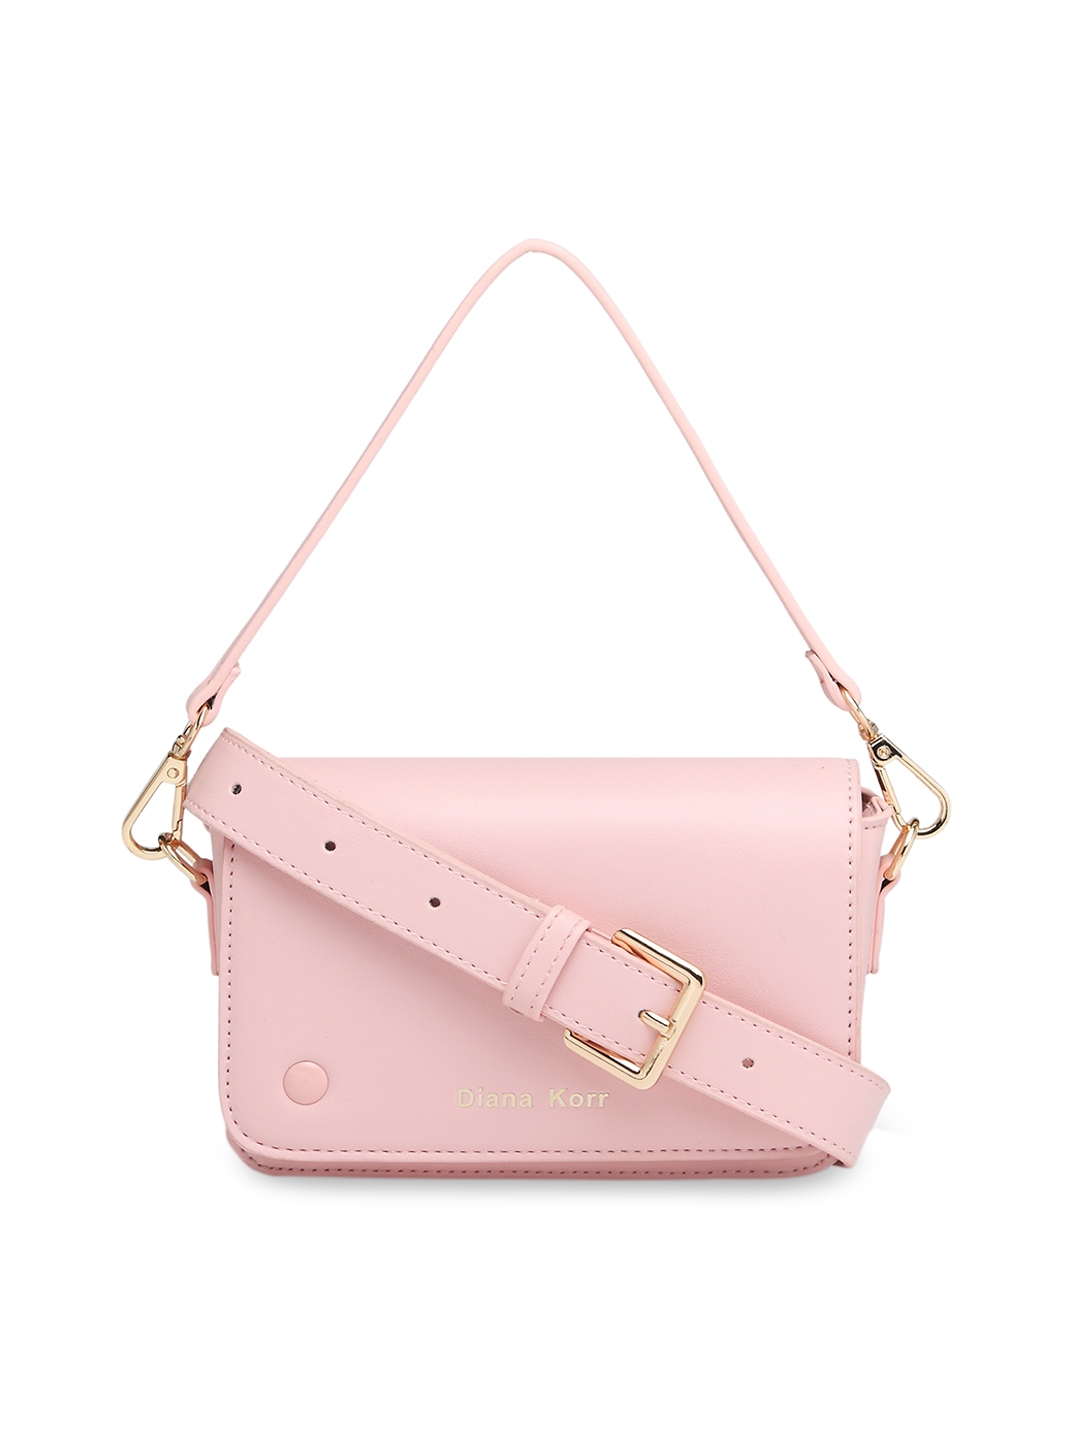 Diana Korr Caven Classic Pink Handbag for Women: Buy Diana Korr Caven  Classic Pink Handbag for Women Online at Best Price in India